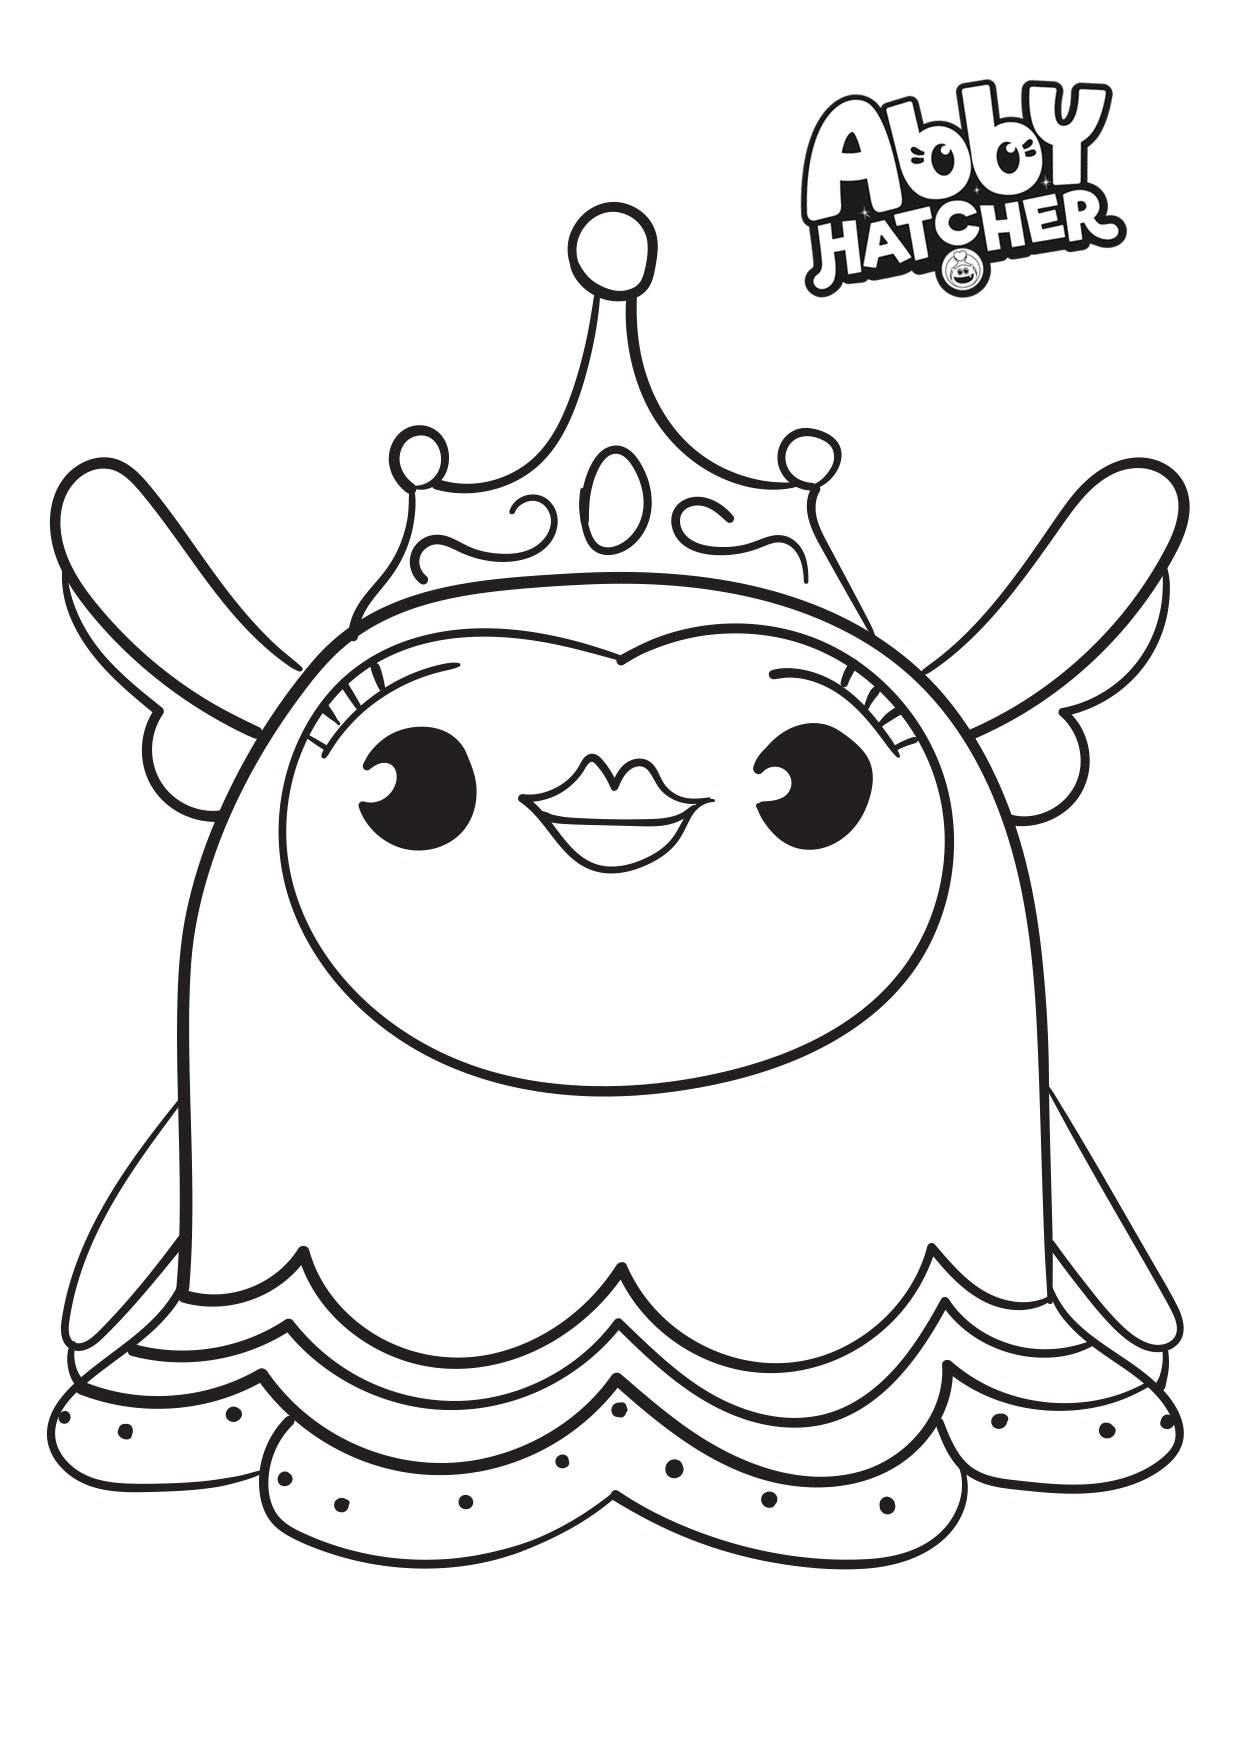 Coloring Pages Princess Flug From Abby Hatcher Nick Jr Coloring Book